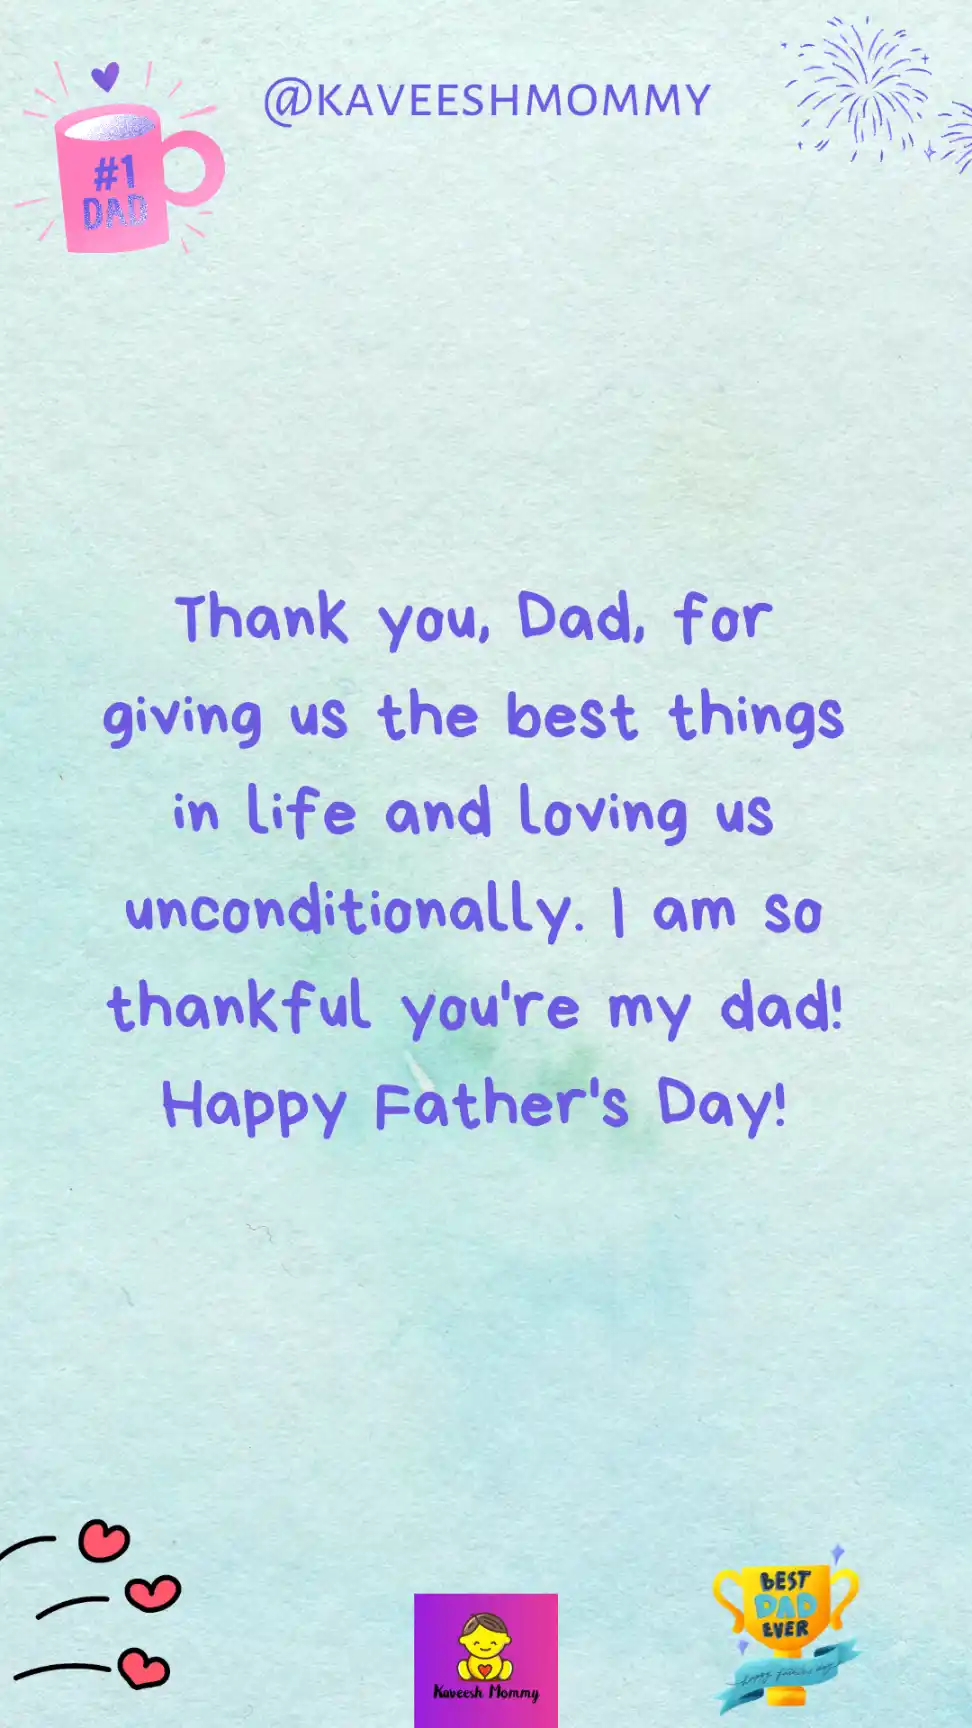 happy fathers day wishes-Thank you, Dad, for giving us the best things in life and loving us unconditionally. I am so thankful you're my dad! Happy Father's Day!